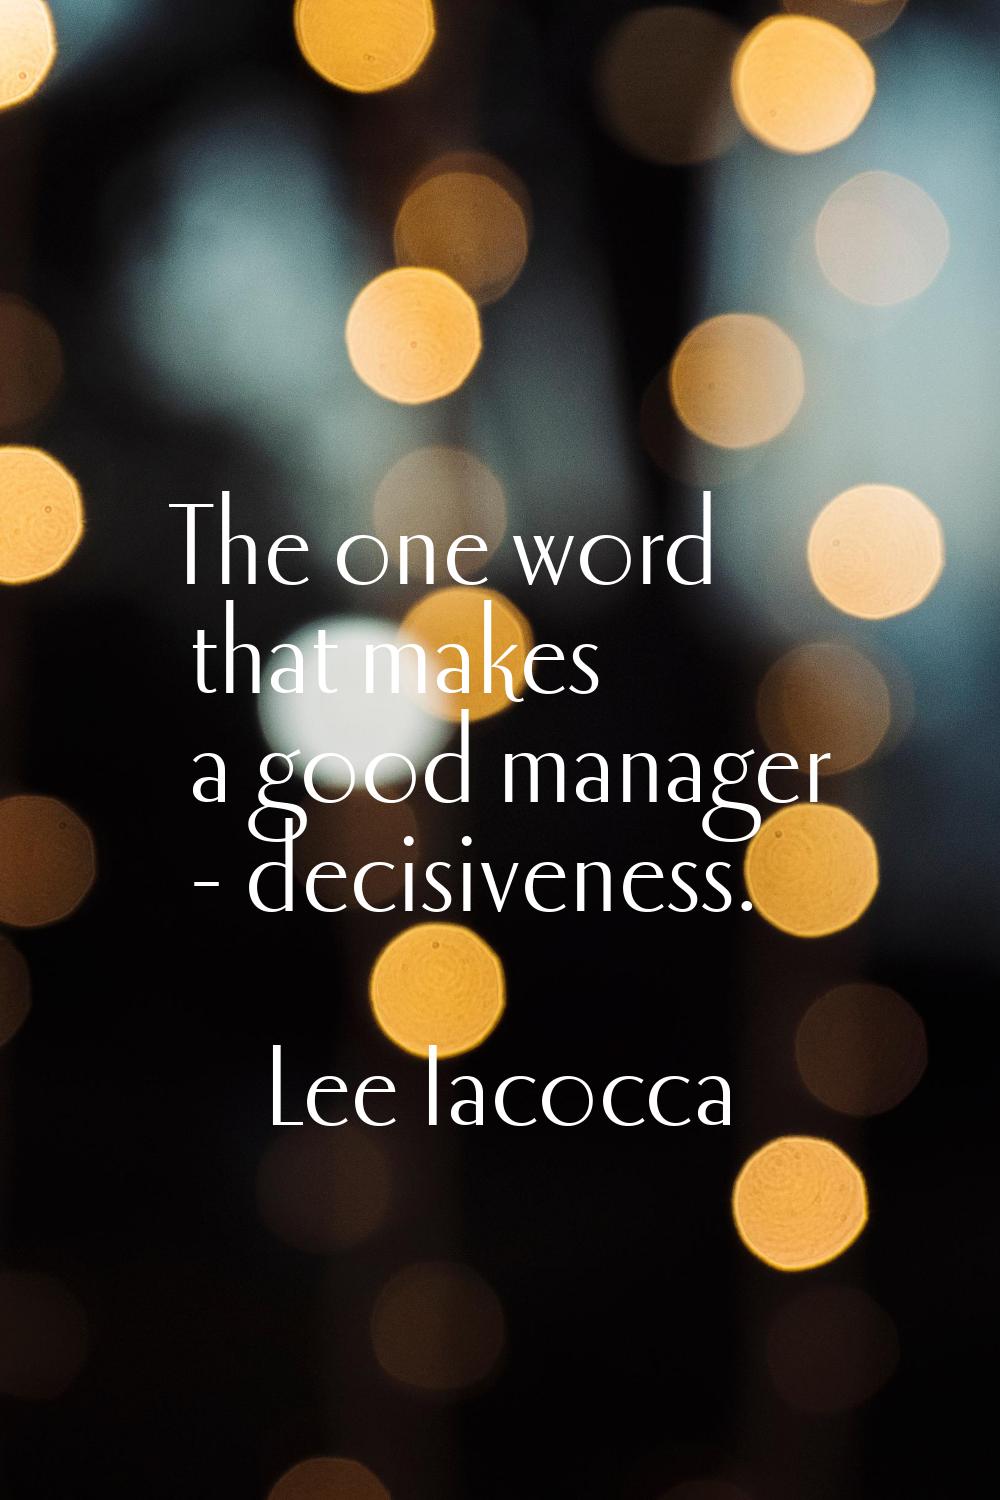 The one word that makes a good manager - decisiveness.